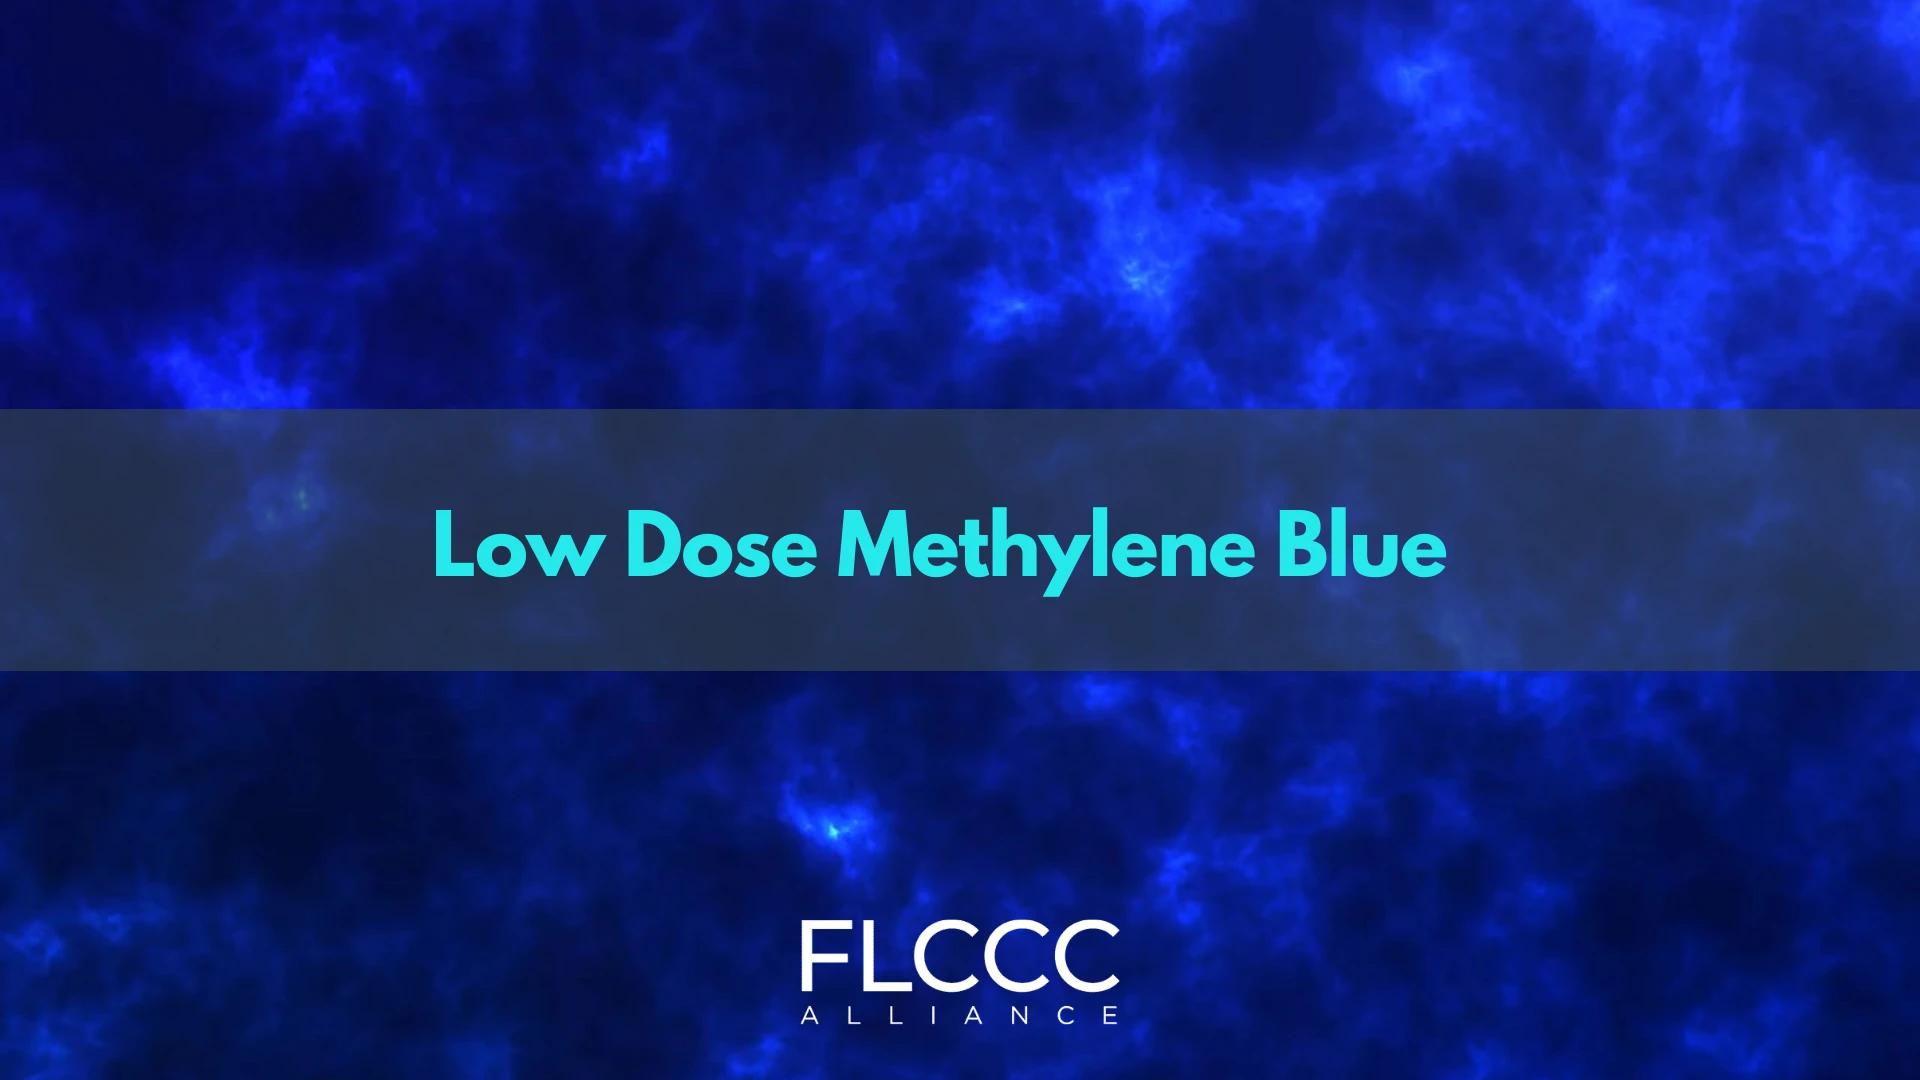 Blue background with text, "Low-Dose Methylene Blue"